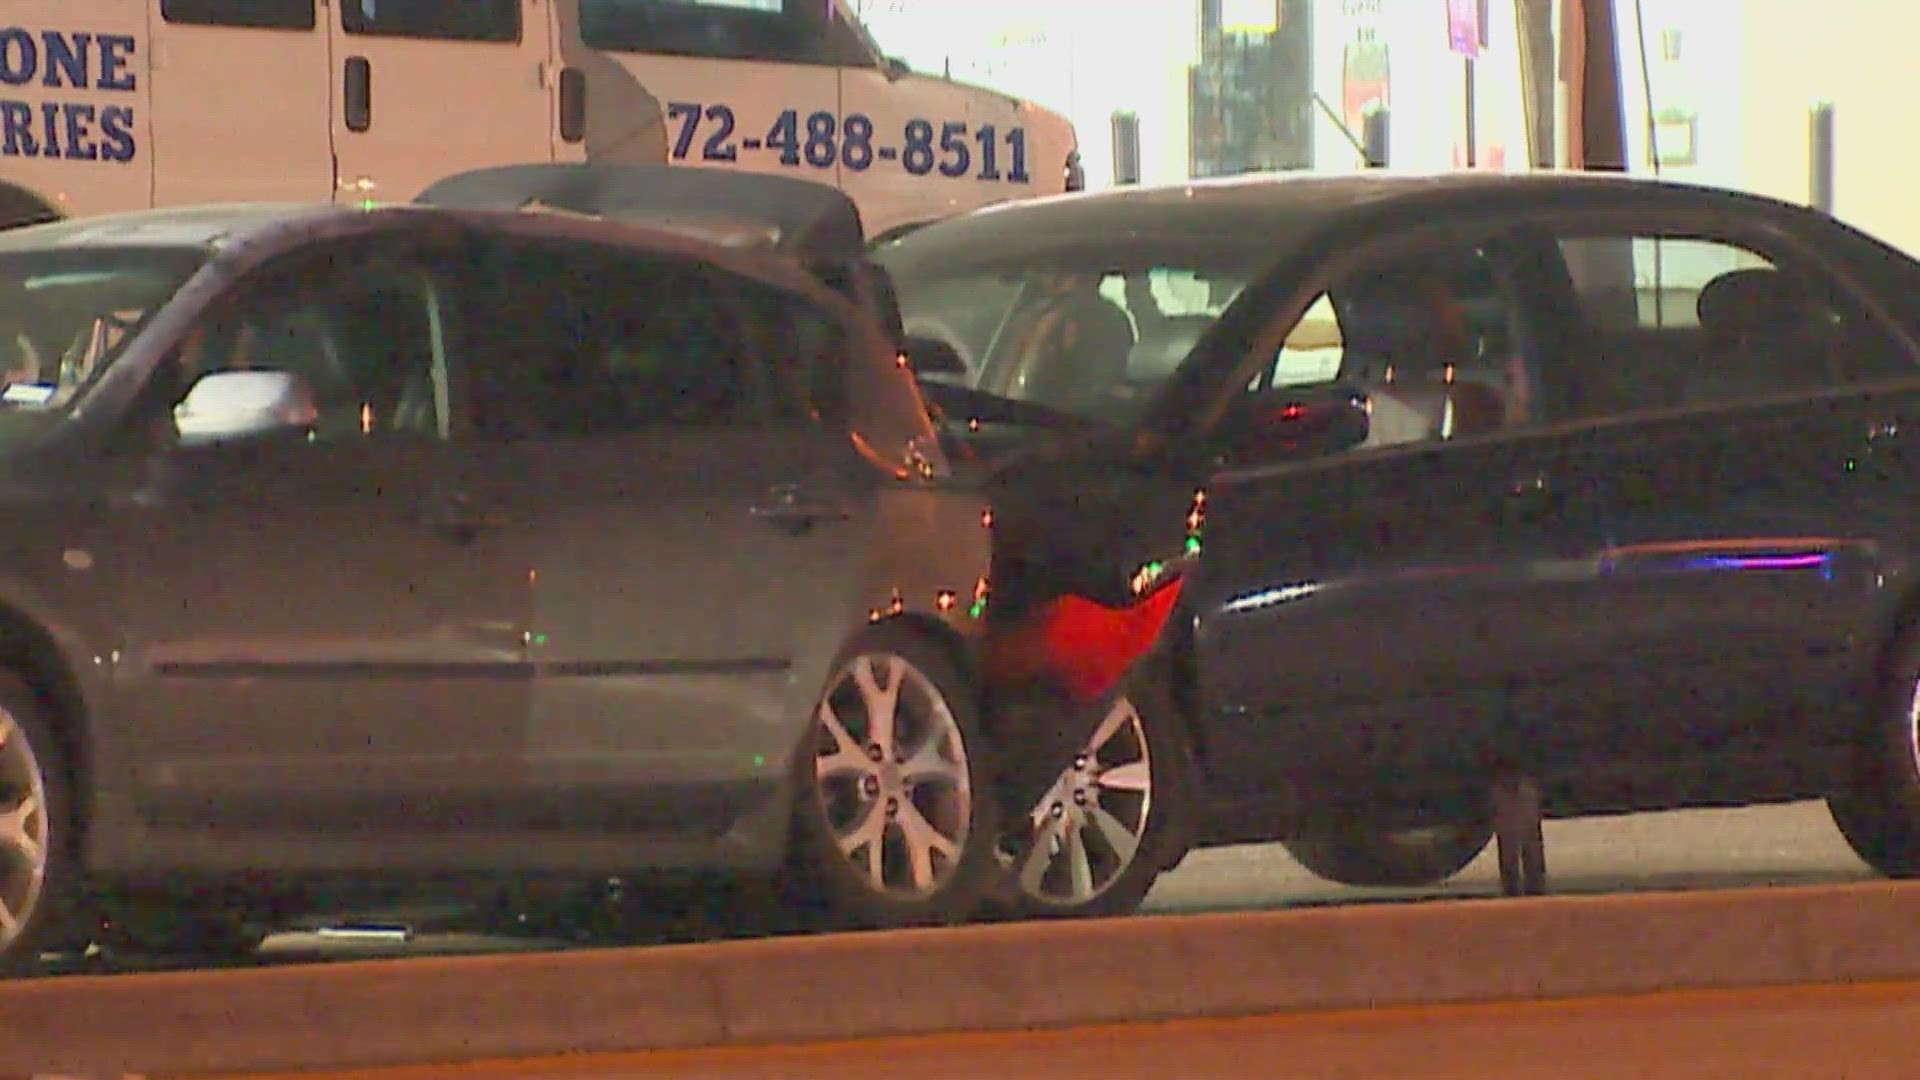 A family of 5 had serious injuries after a rear-end crash in Dallas on Thursday night.